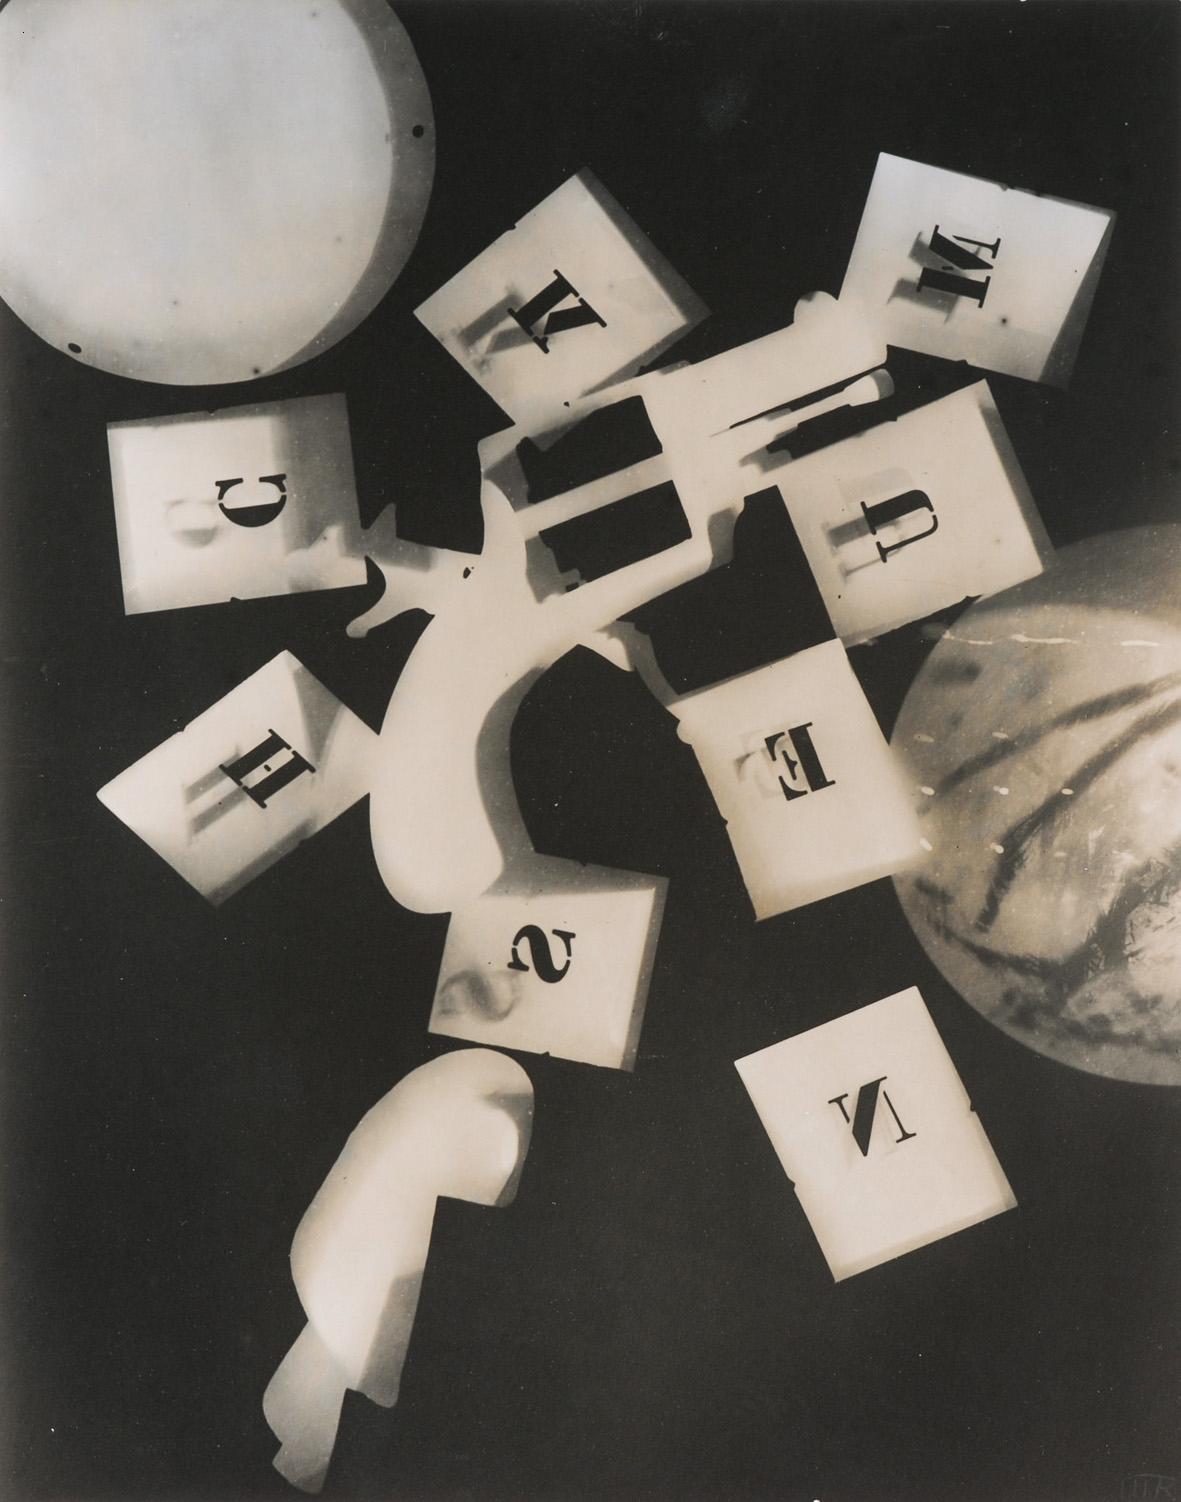 Man Ray, Untitled (Gun with Alphabet Squares), 1924, print 1966, silver gelatin print of a Rayograph. © Man Ray Trust, by SIAE 2014